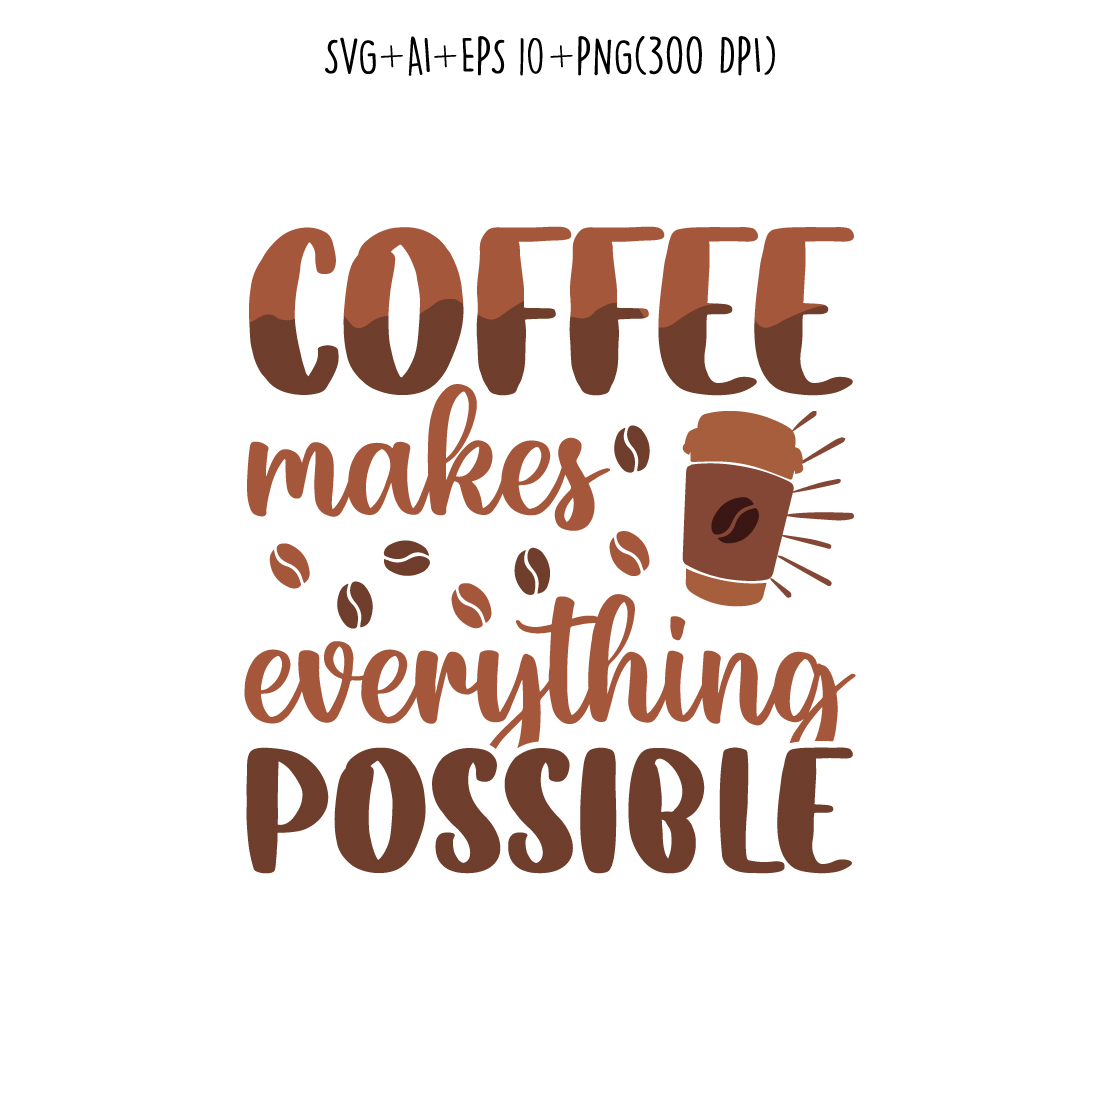 Coffee makes everything possible typography design for t-shirts, print, templates, logos, mug cover image.